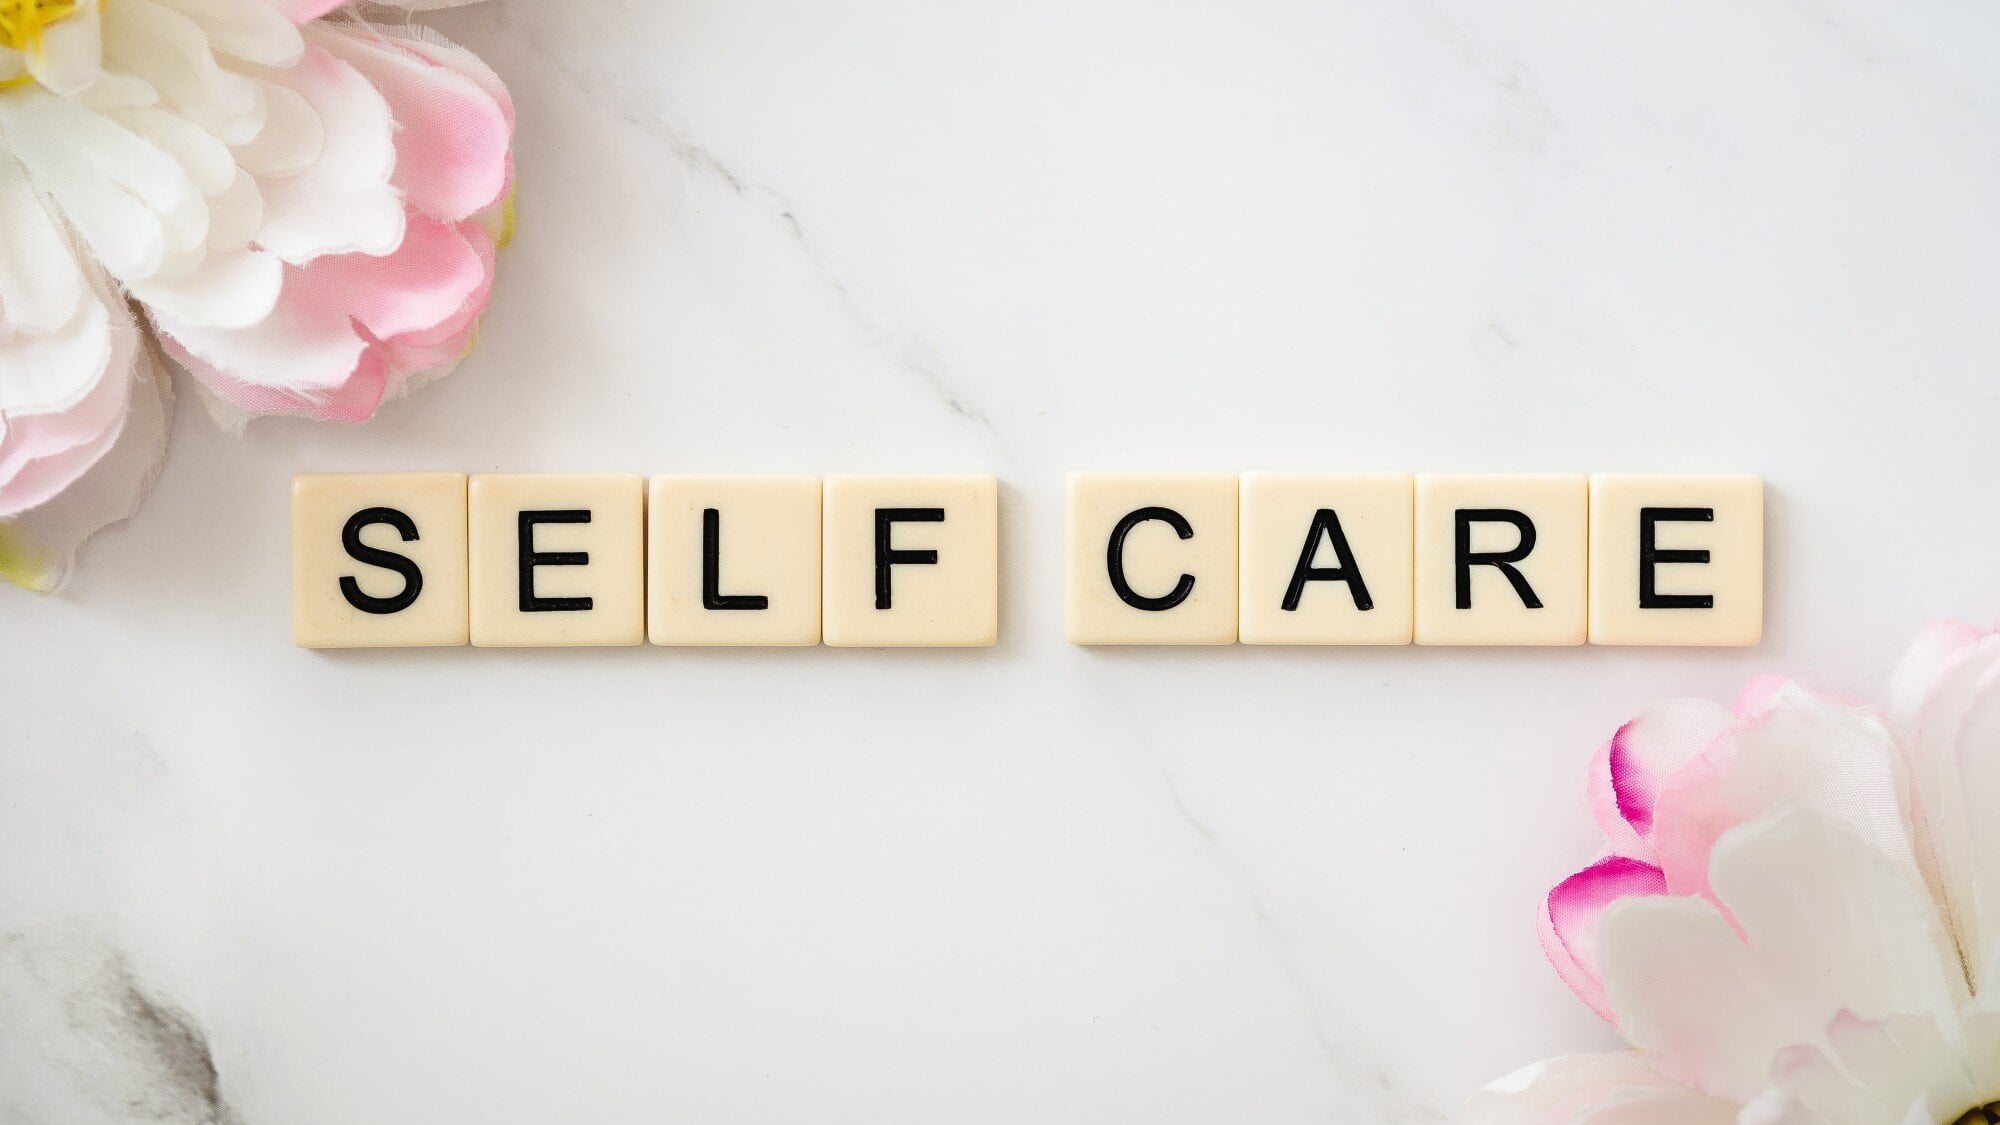 If you're living with Lymphedema, self-care is vital. Here are some of the simple ways you can help manage your condition.